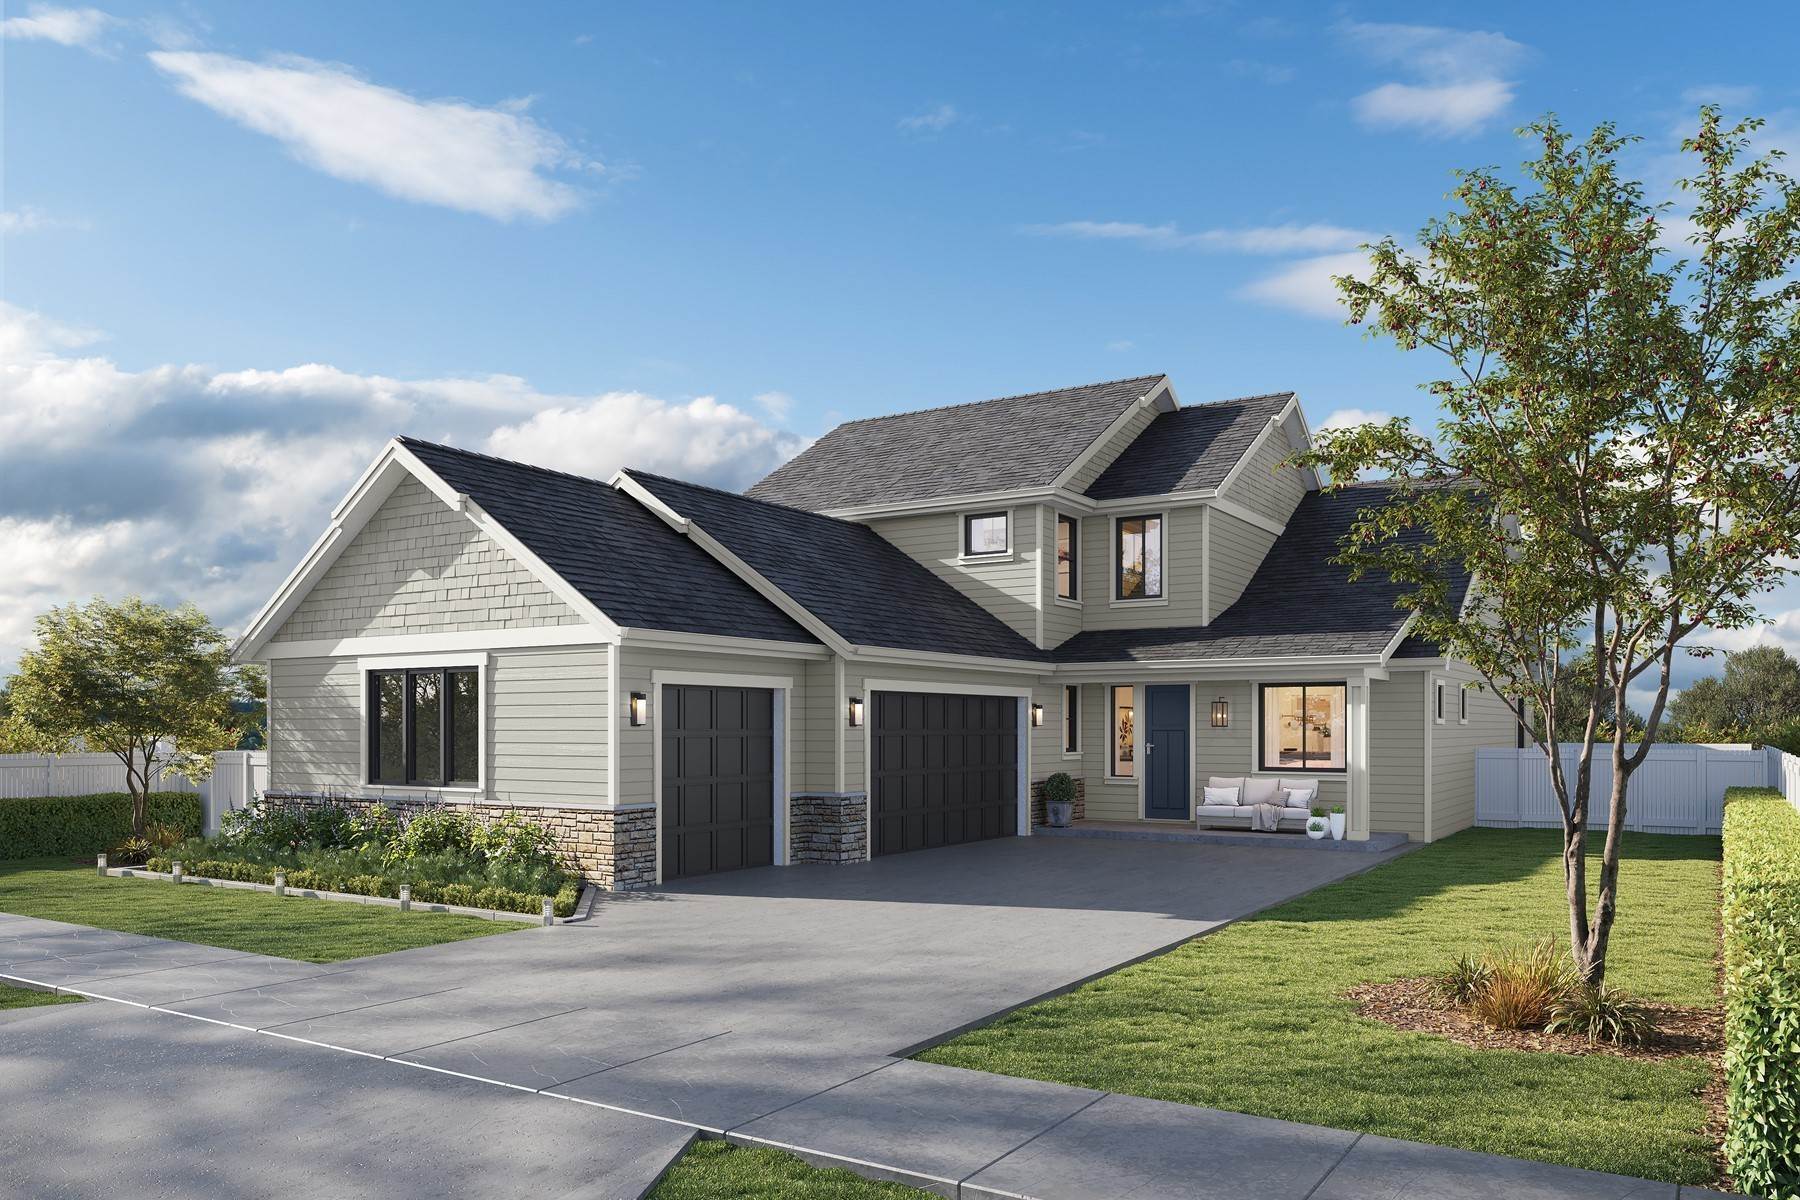 Single Family Homes for Sale at The Acadia w/Basement 4511 W Homeward Bound Blvd Coeur d’Alene, Idaho 83815 United States